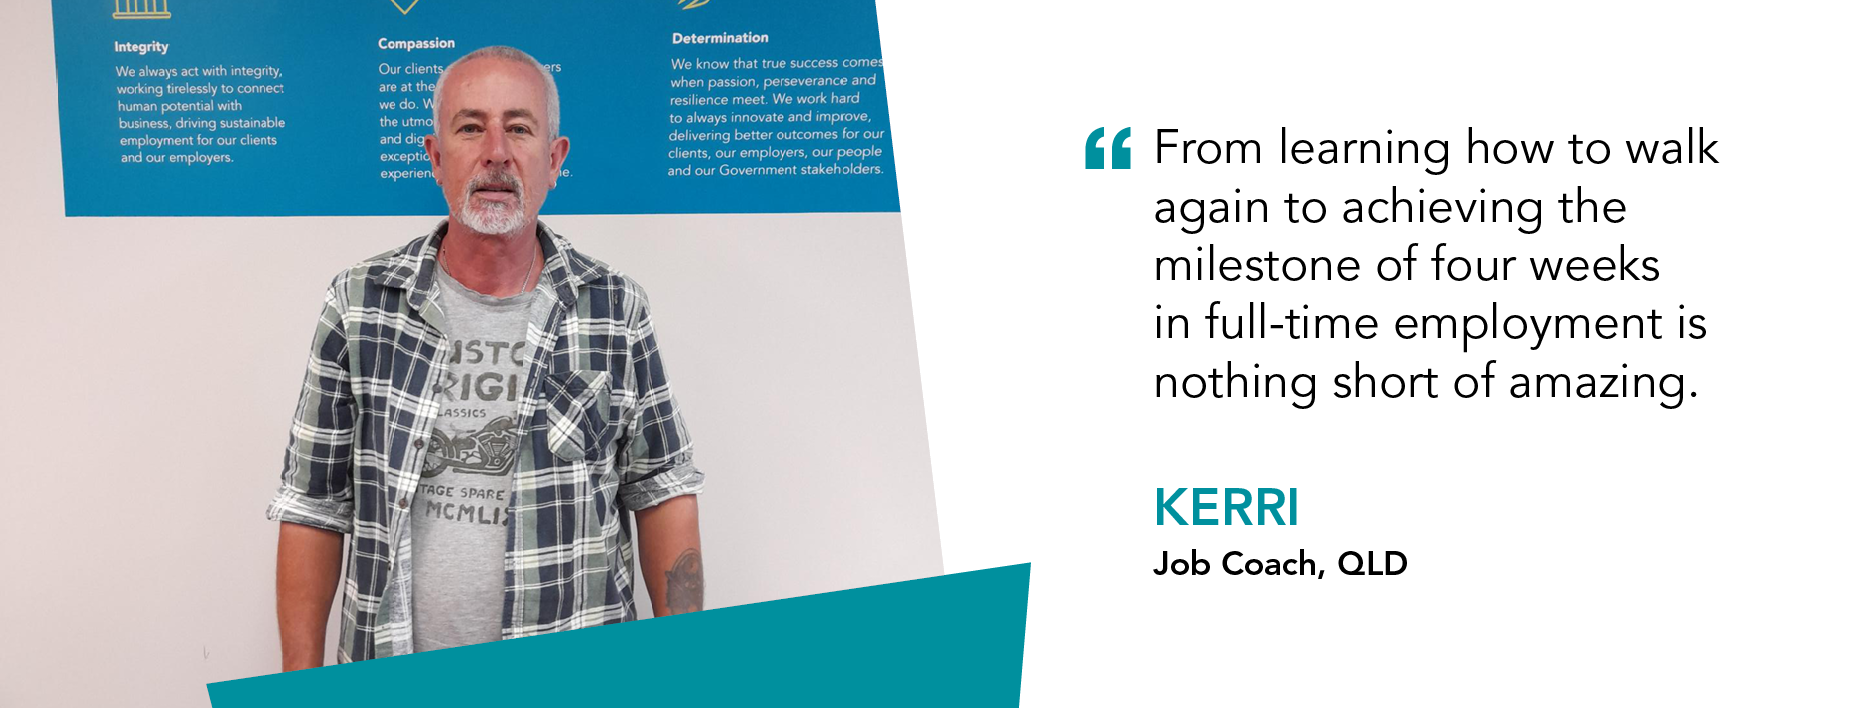 From learning how to walk again to achieving the milestone of four weeks in full-time employment is nothing short of amazing - Kerri, Job Coach QLD